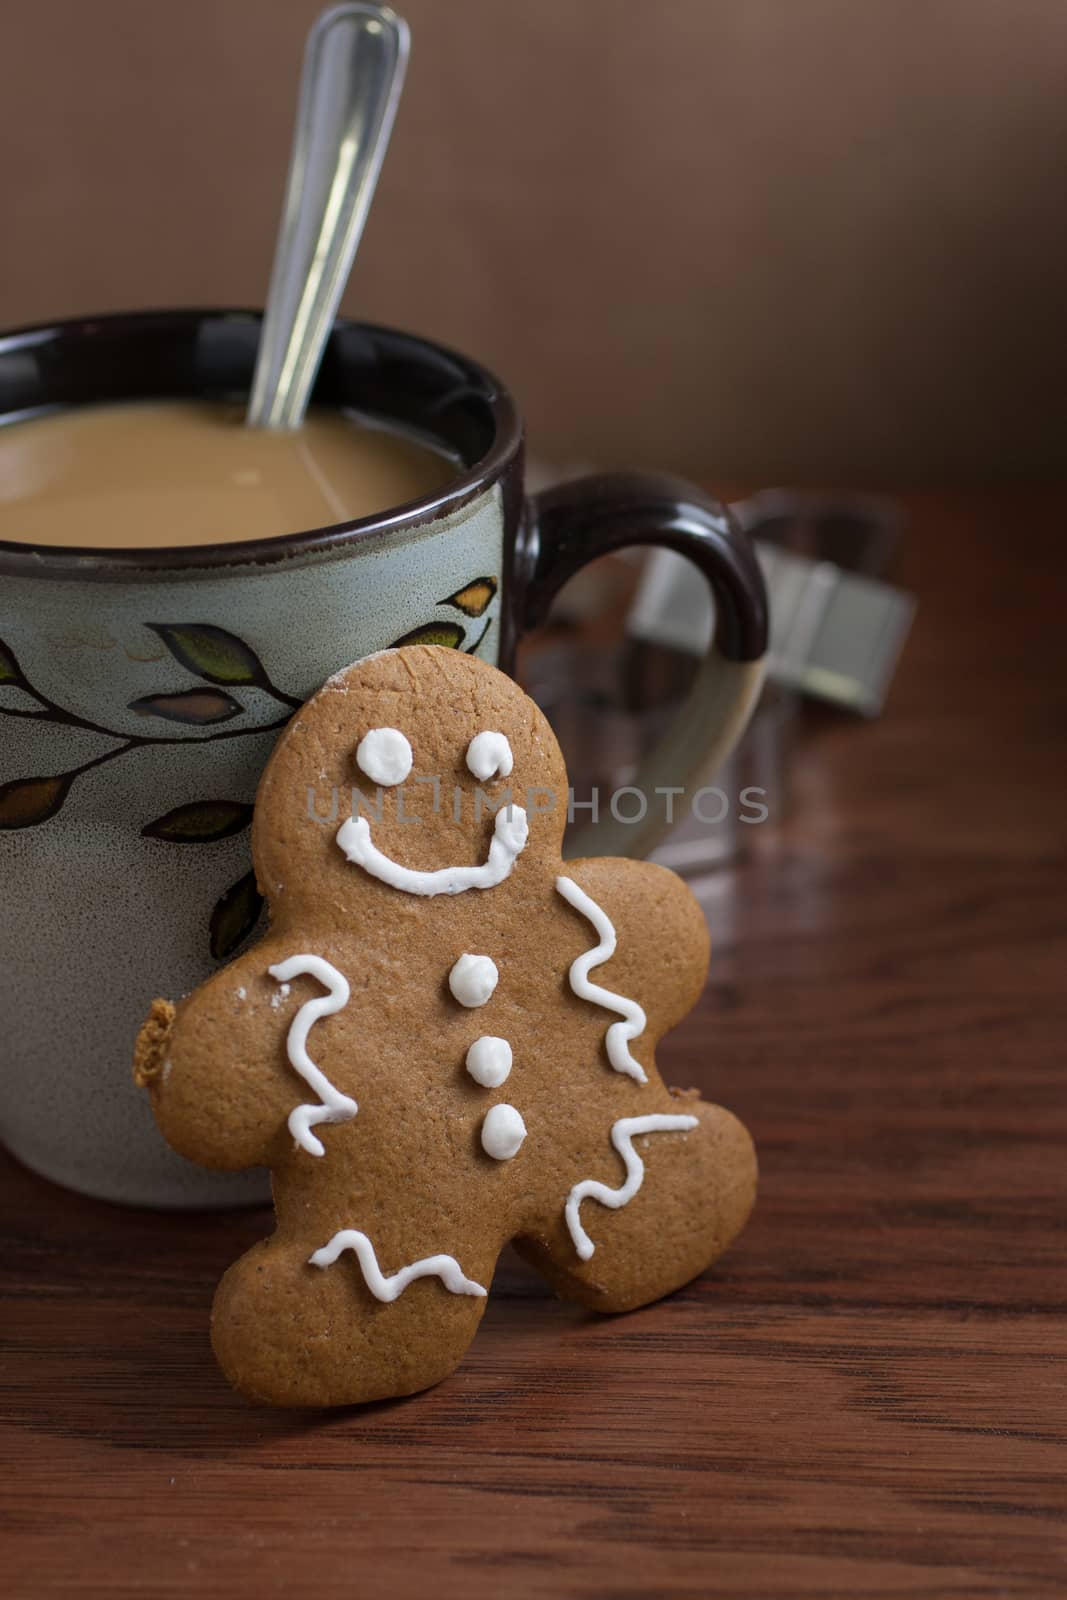 Coffee and a Gingerbread Man by SouthernLightStudios